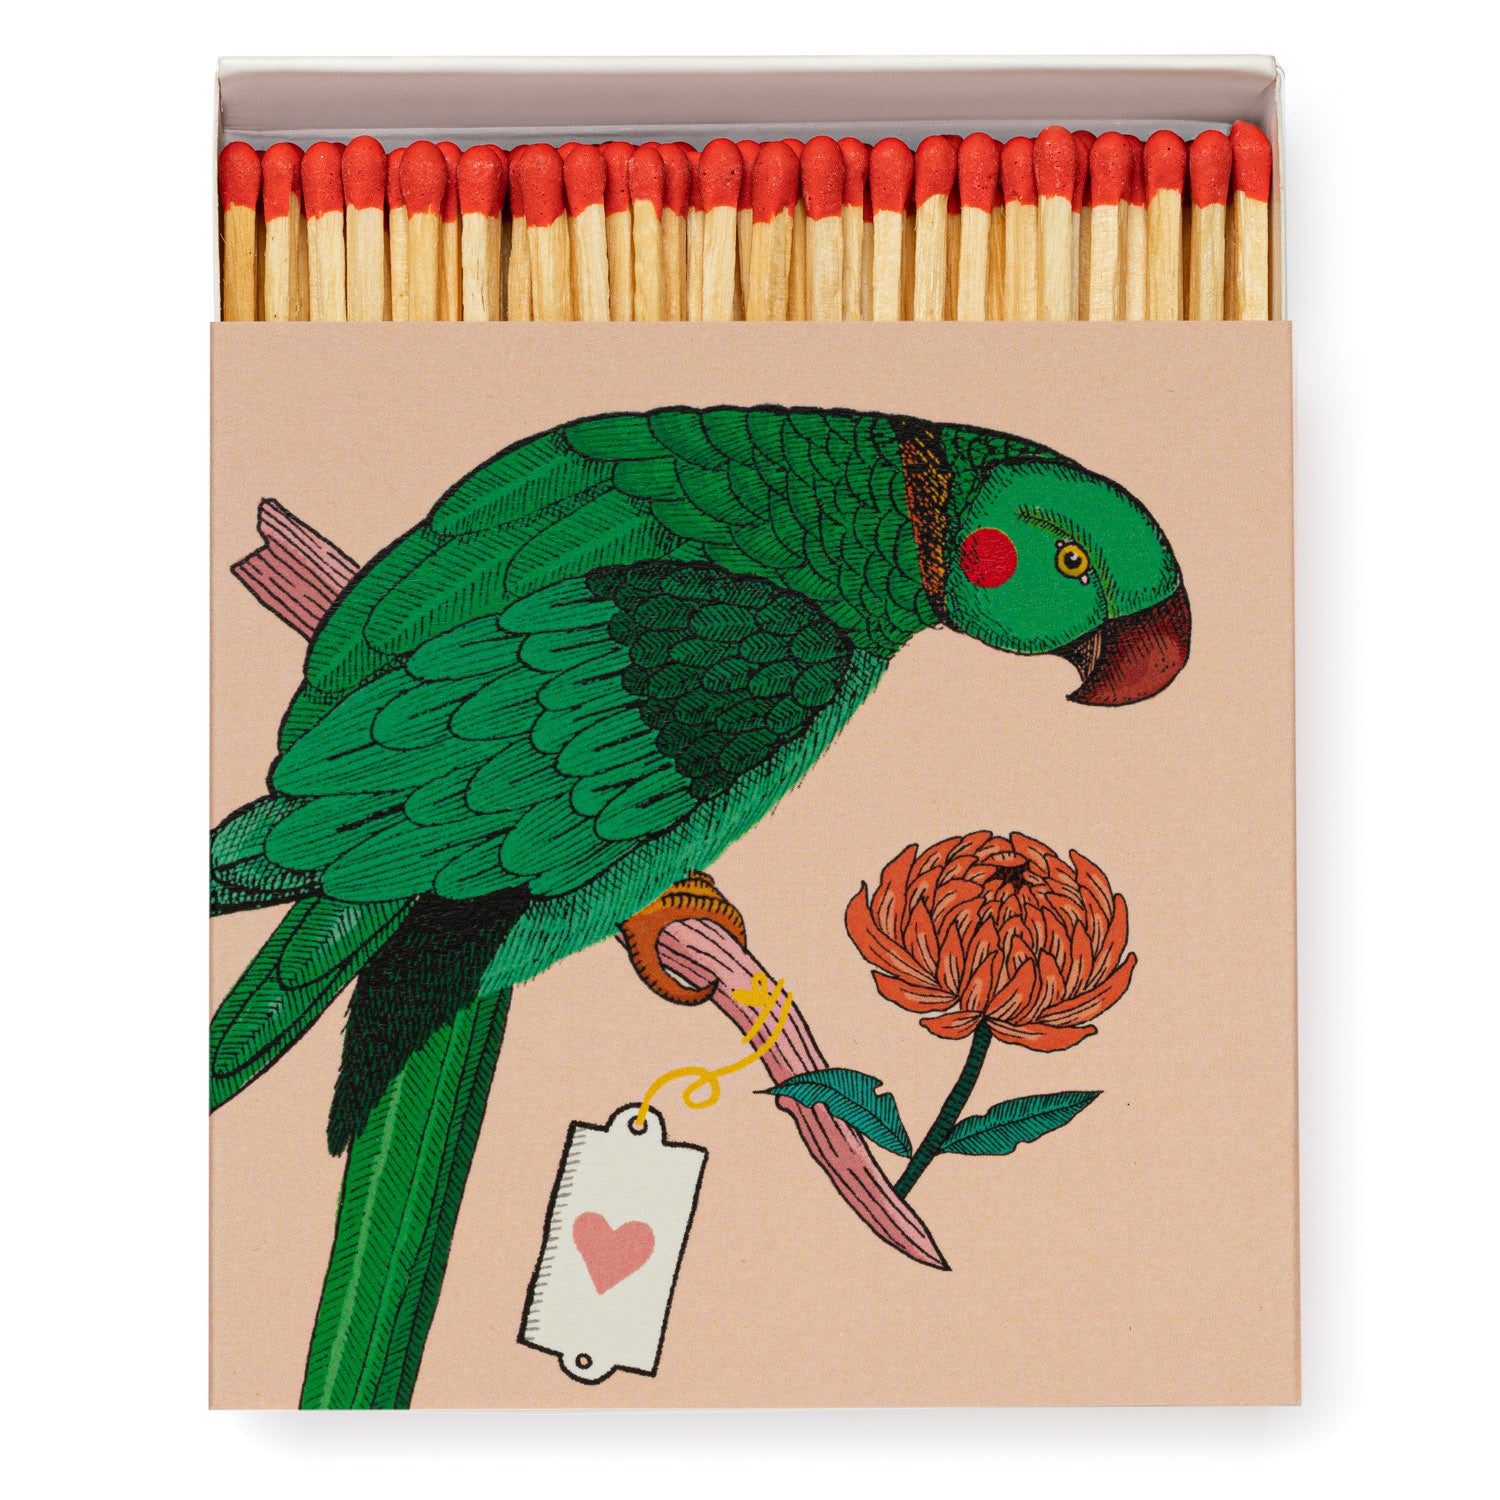 Long Matches - Square Box | Ariane's Parrot | by Archivist - Lifestory